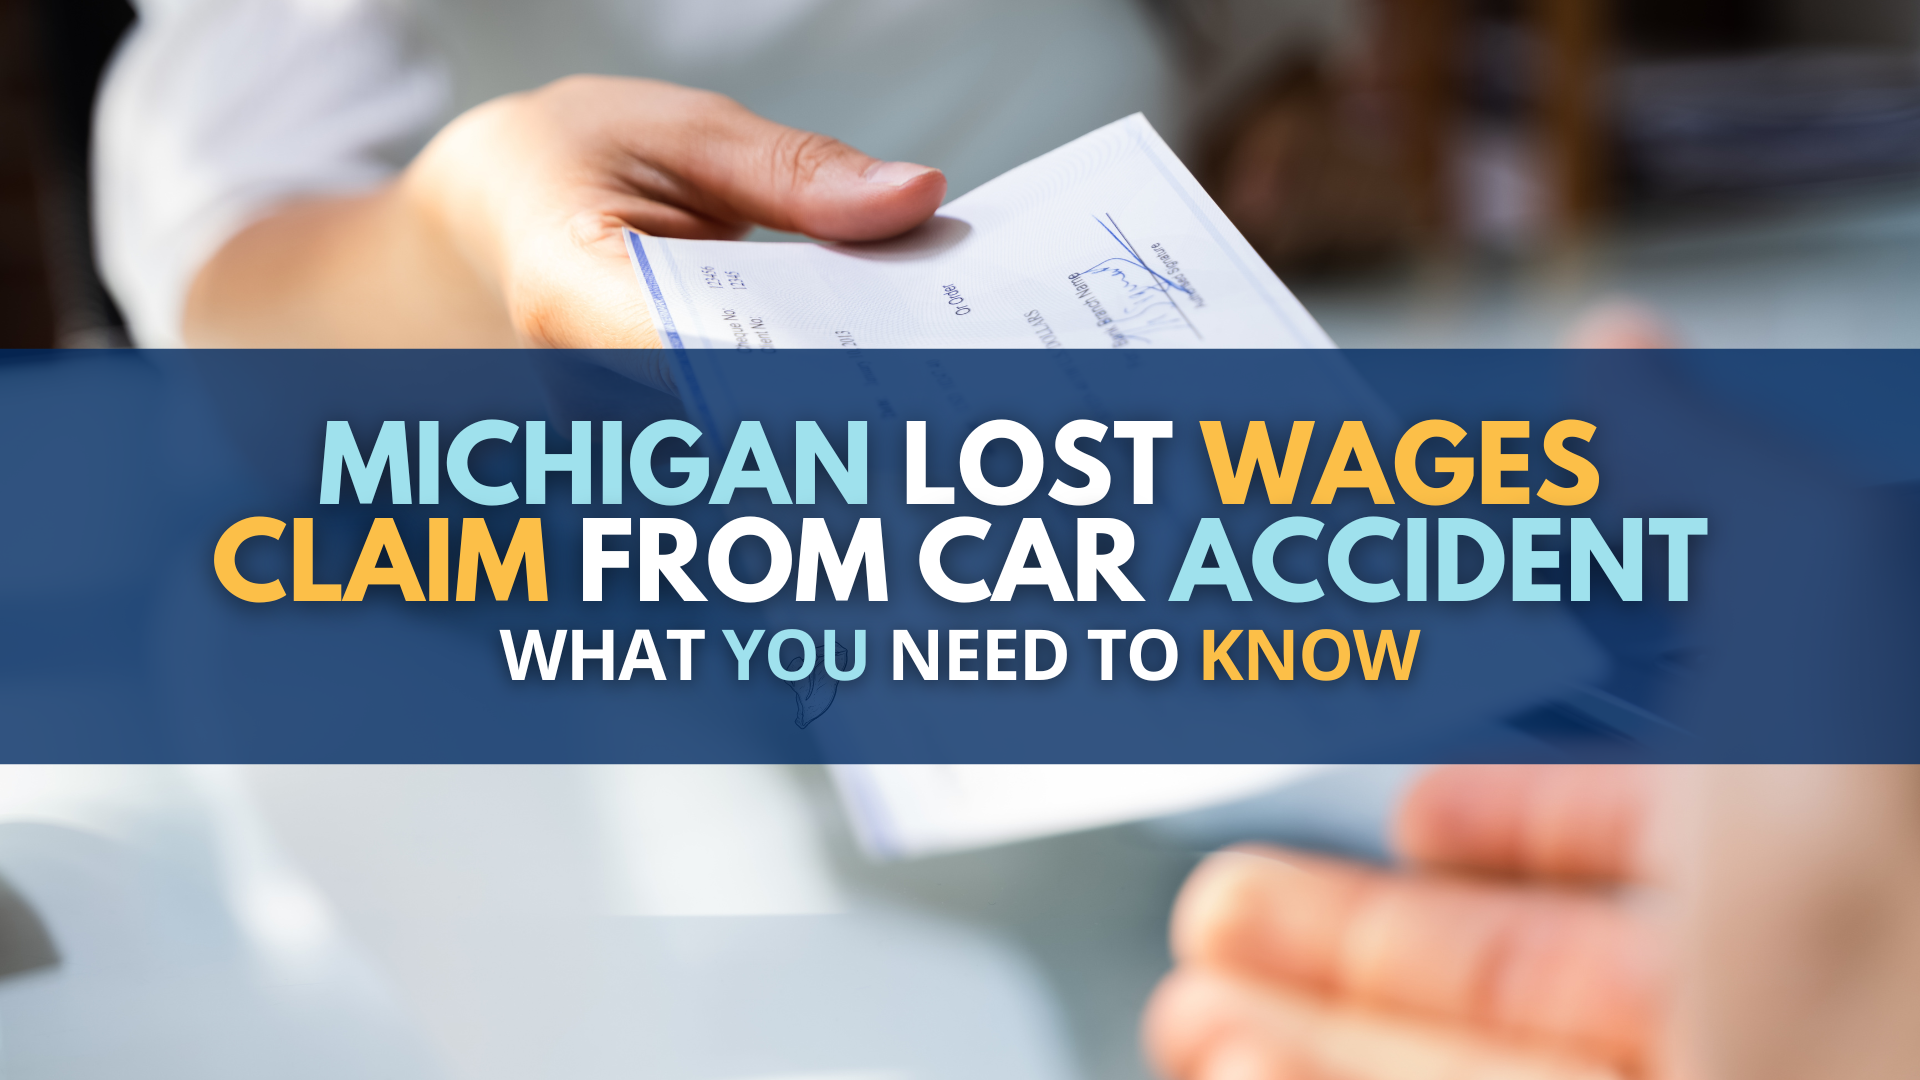 Michigan Lost Wages Claim From Car Accident: What You Need To Know